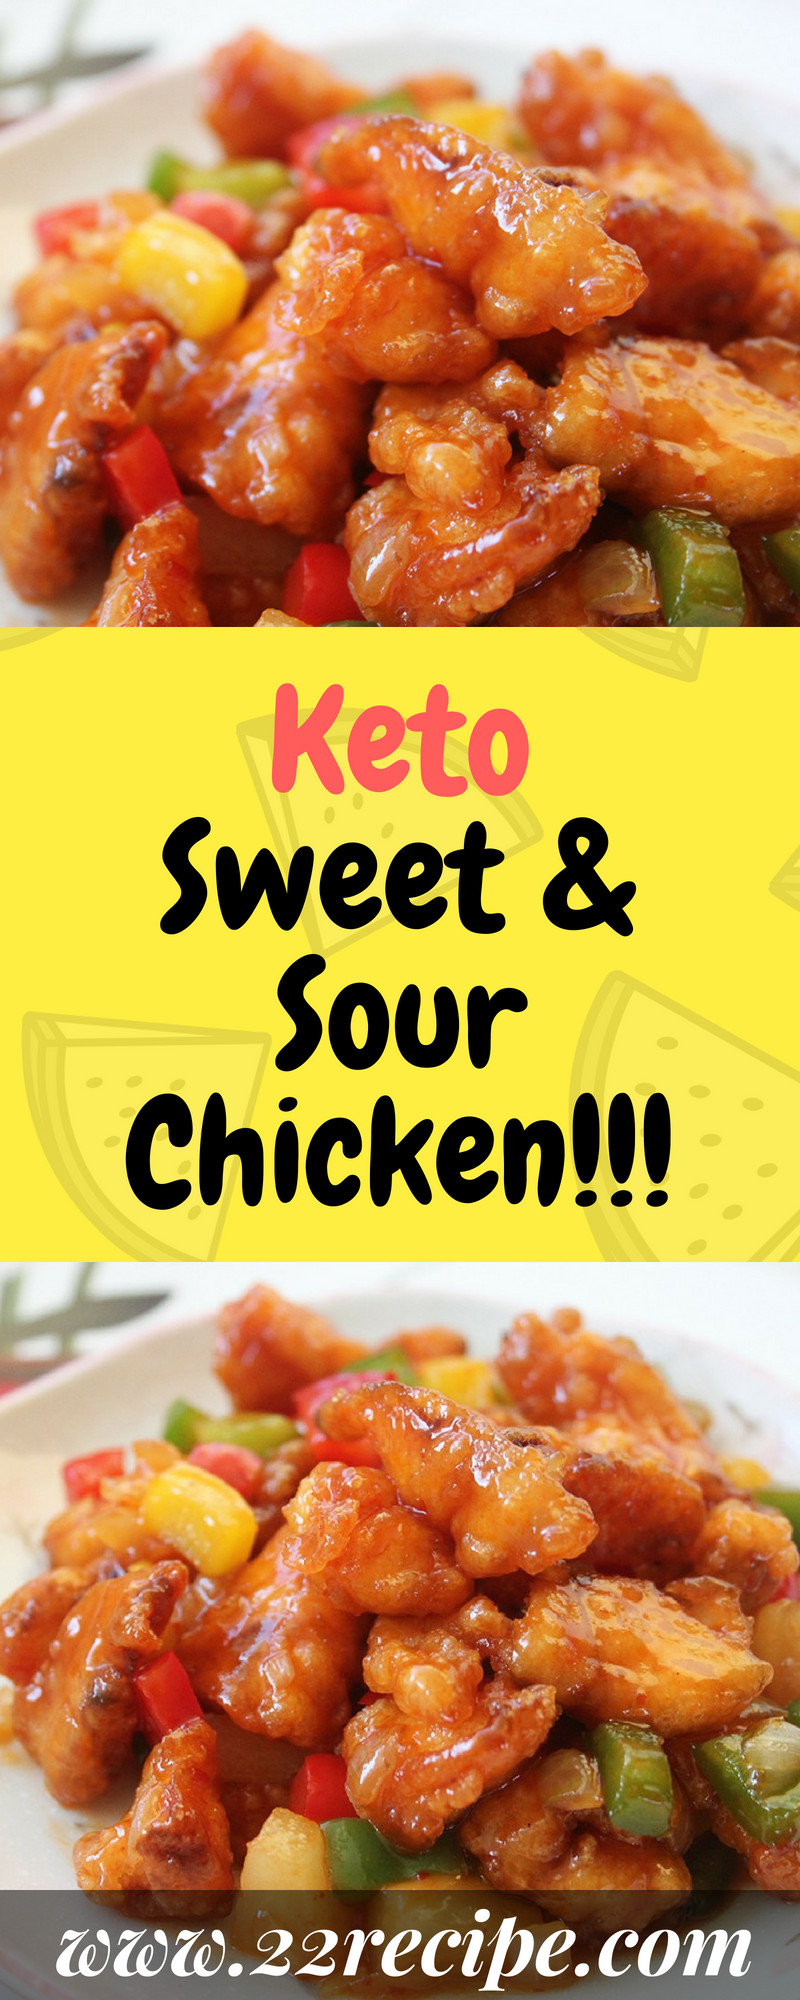 Sweet And Sour Chicken Keto
 Keto Sweet & Sour Chicken